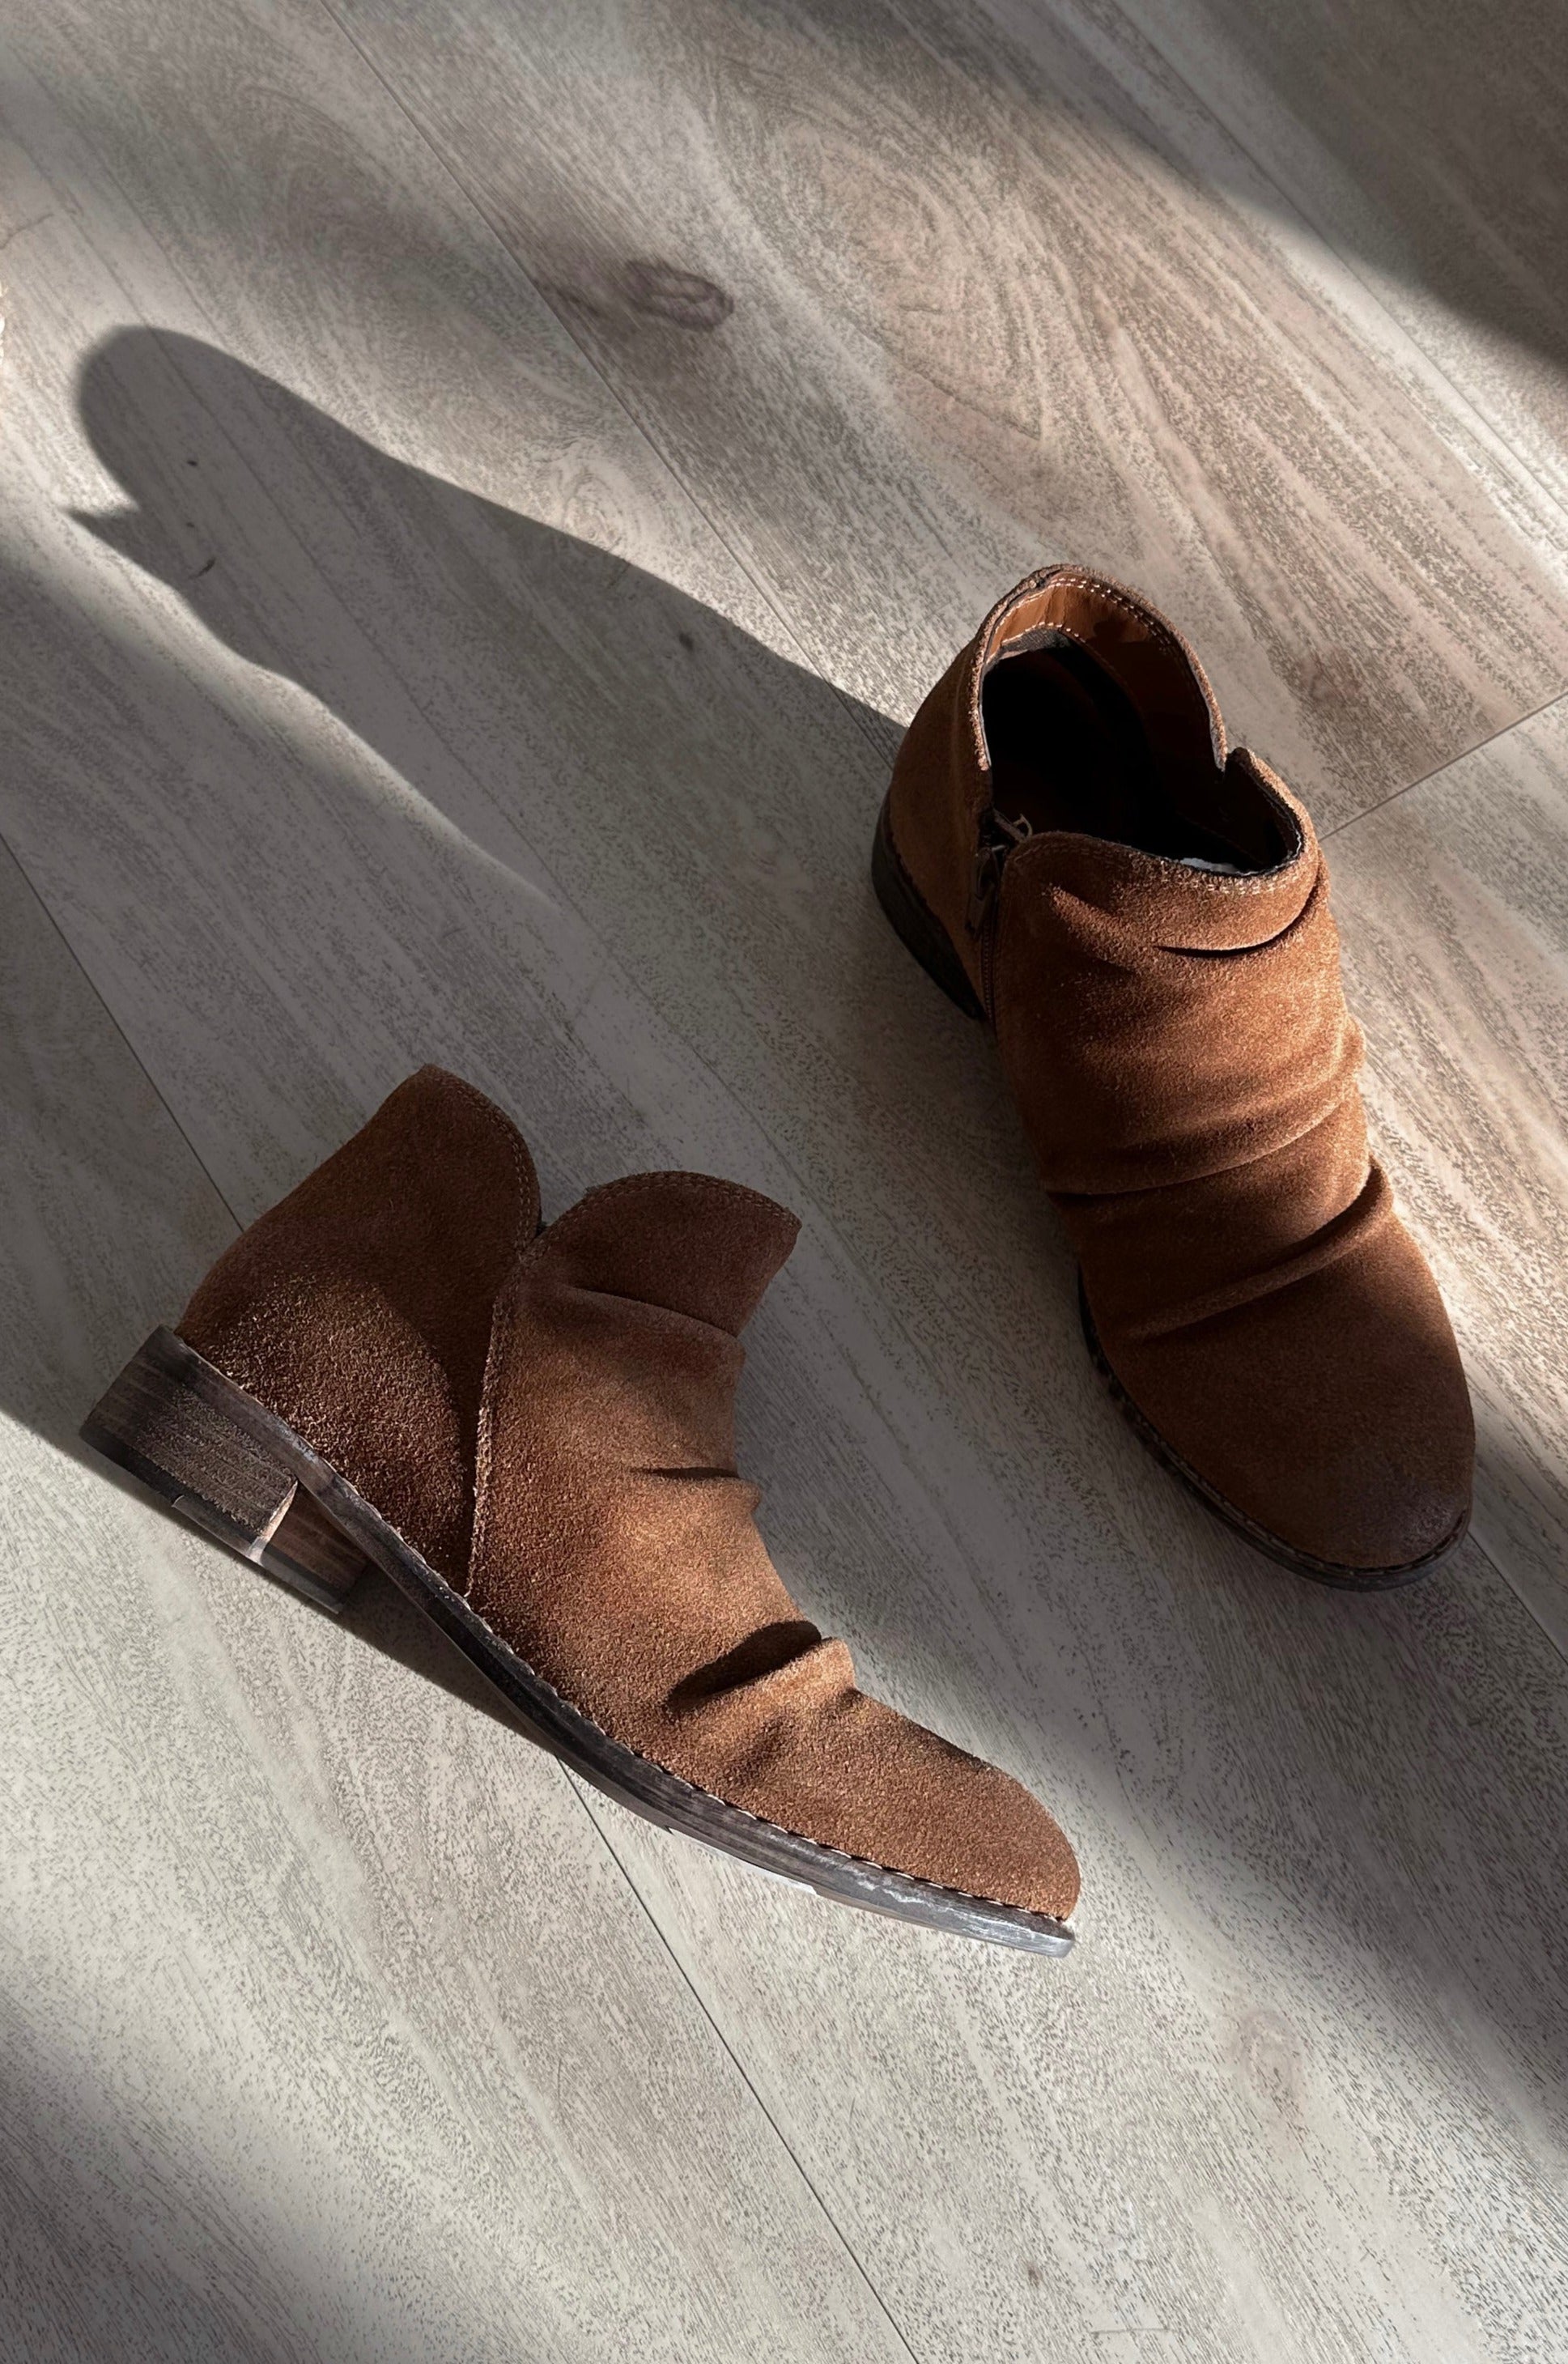 Ariel view of the Rose Mera Bootie in Tan Suede which features light brown suede fabric, slouched details, inside zipper closure, round toe, lightly cushioned footbed and 1.25" stack heel